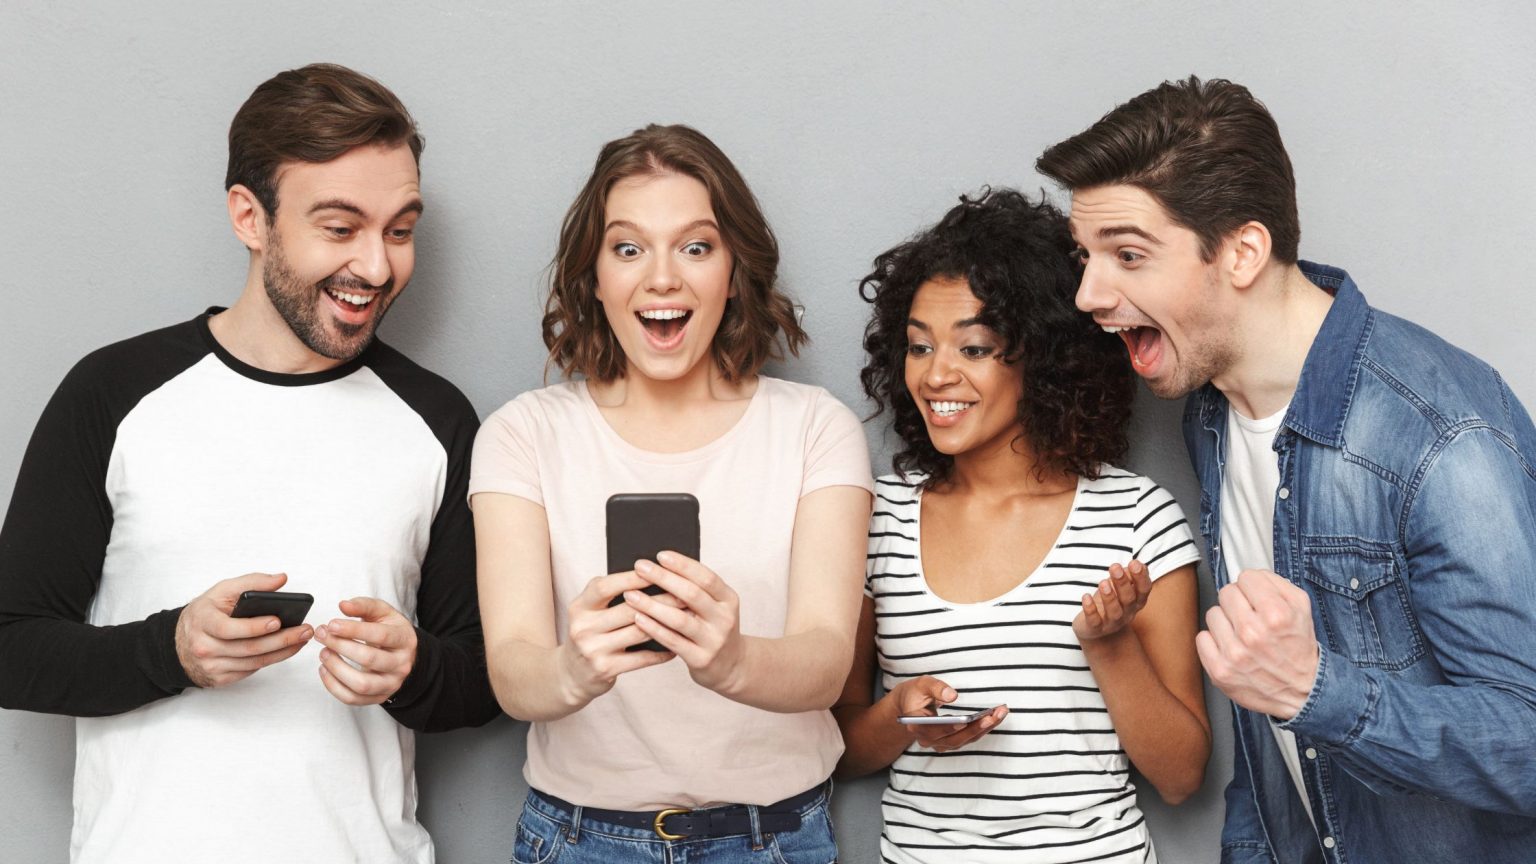 Two young males and two young females looking at the young females phone, excited and smiling.